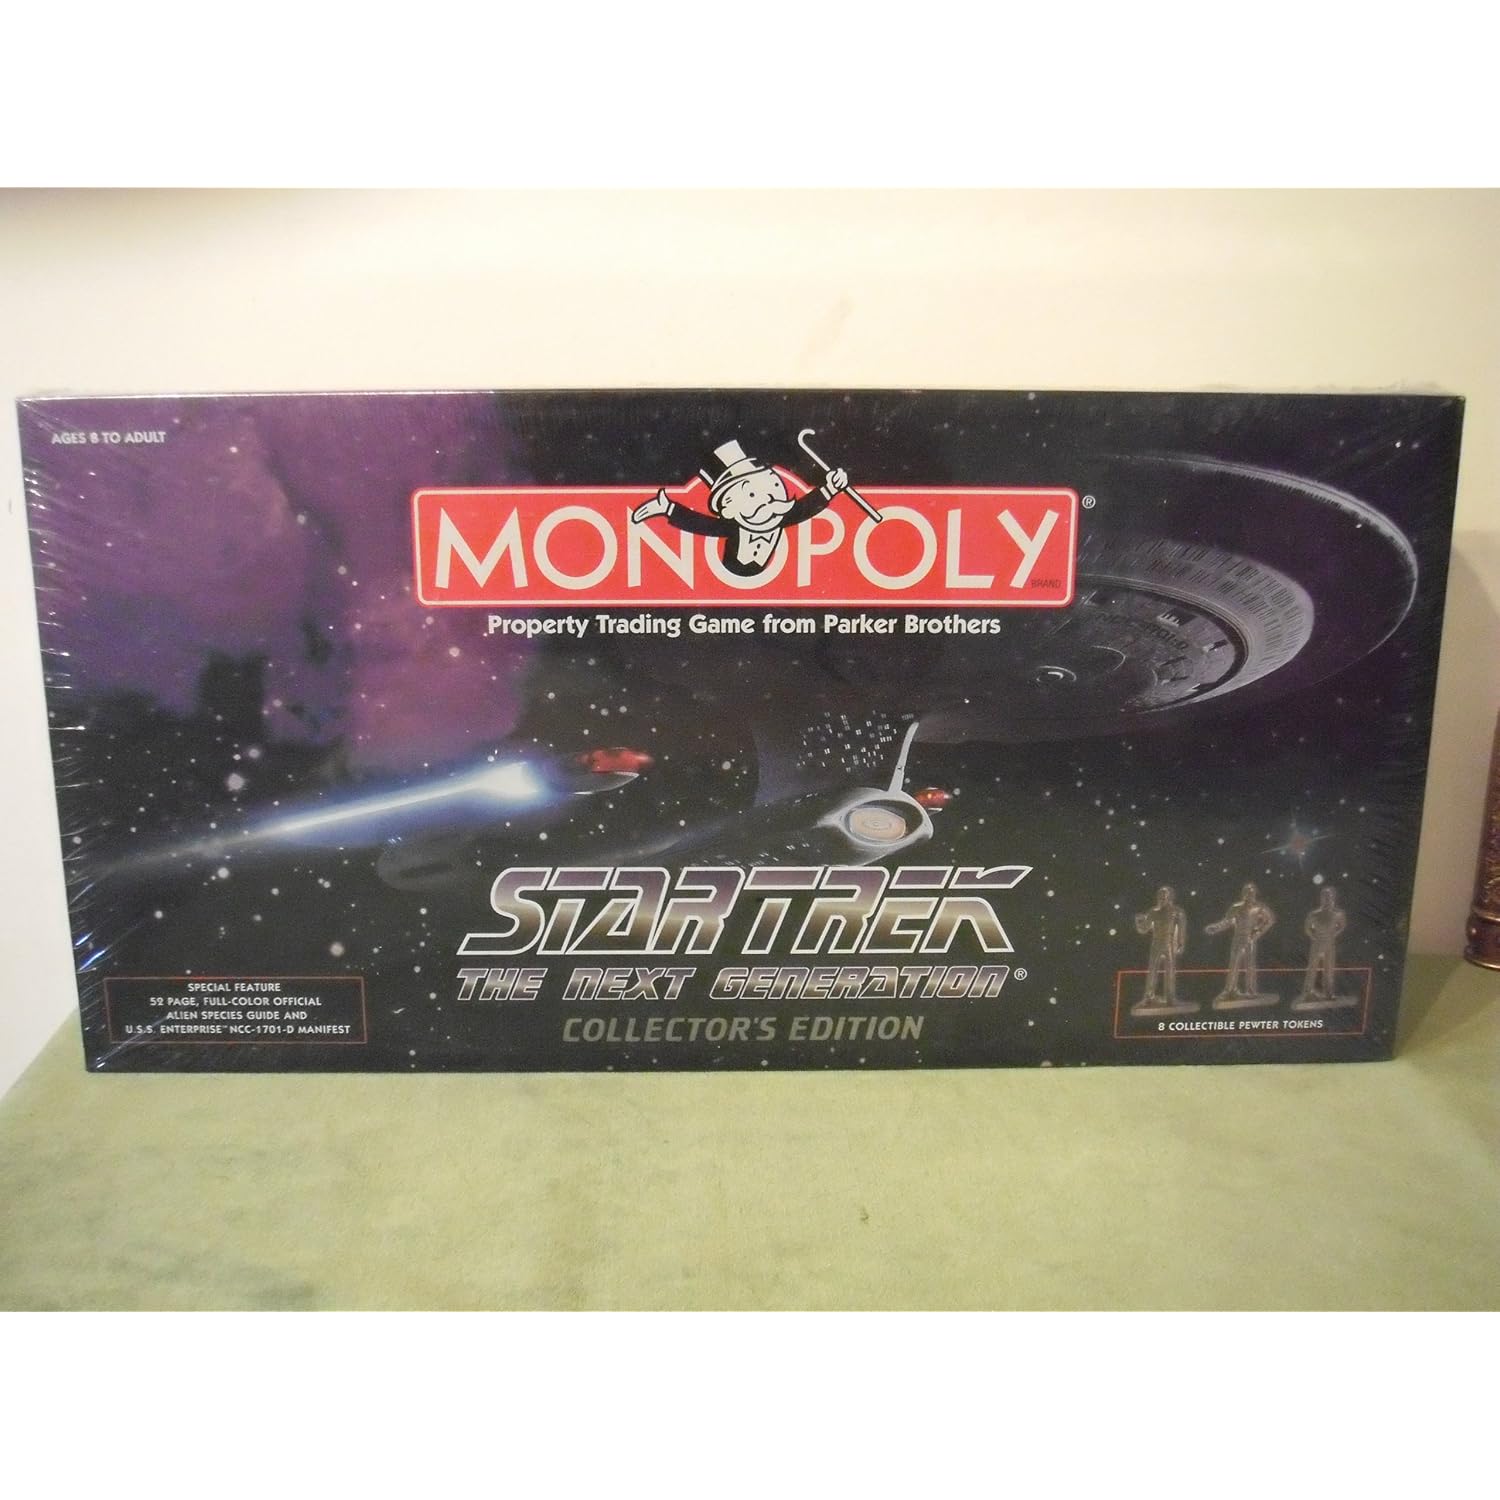 USAopoly - Star Trek monopoly The Next Generation Collector's EditionANGL